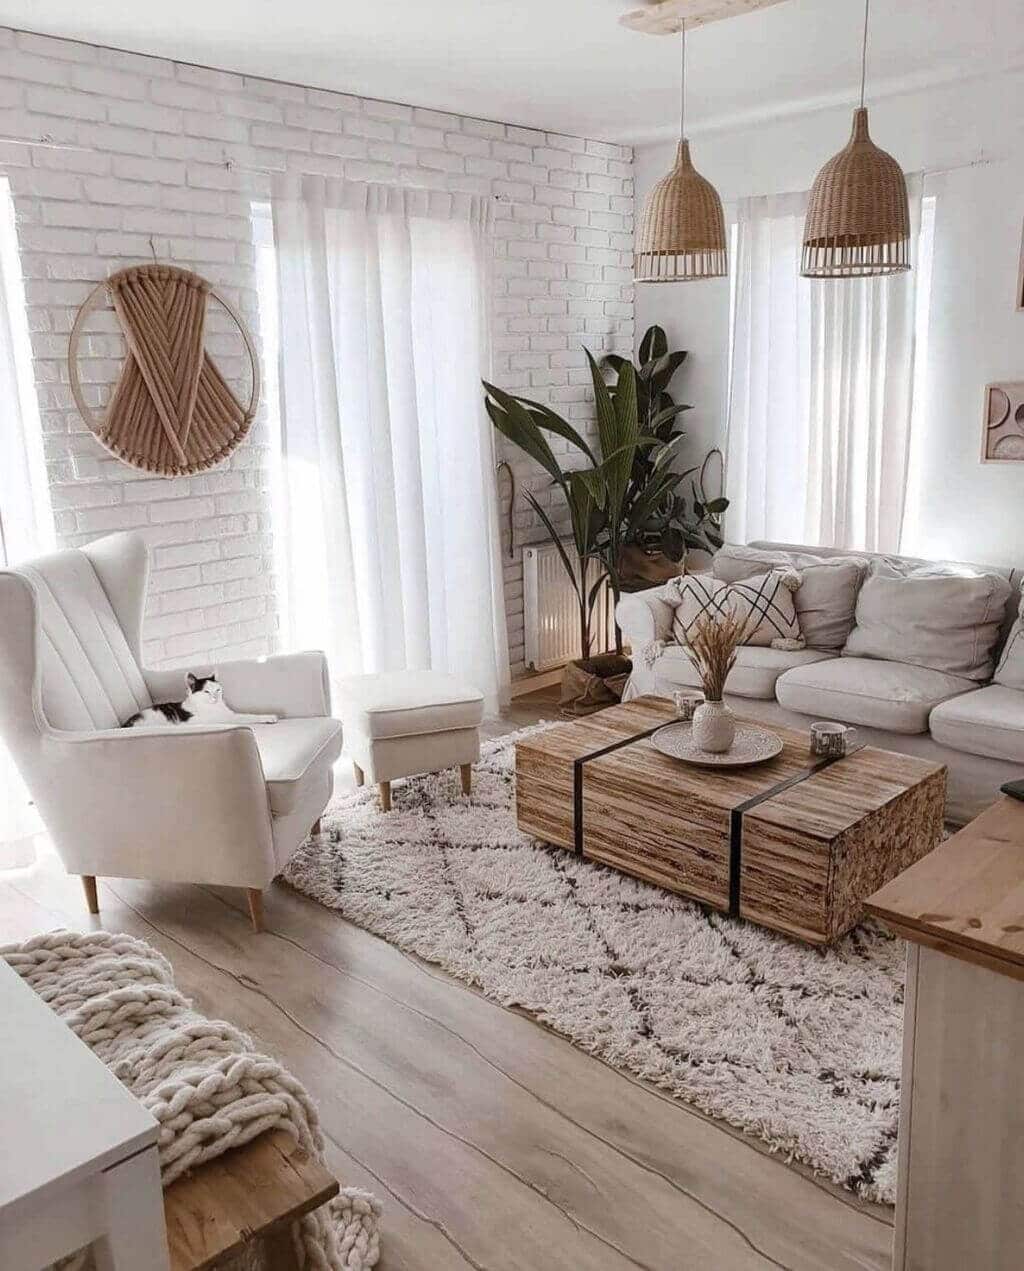 A living room filled with furniture and a white brick wall
